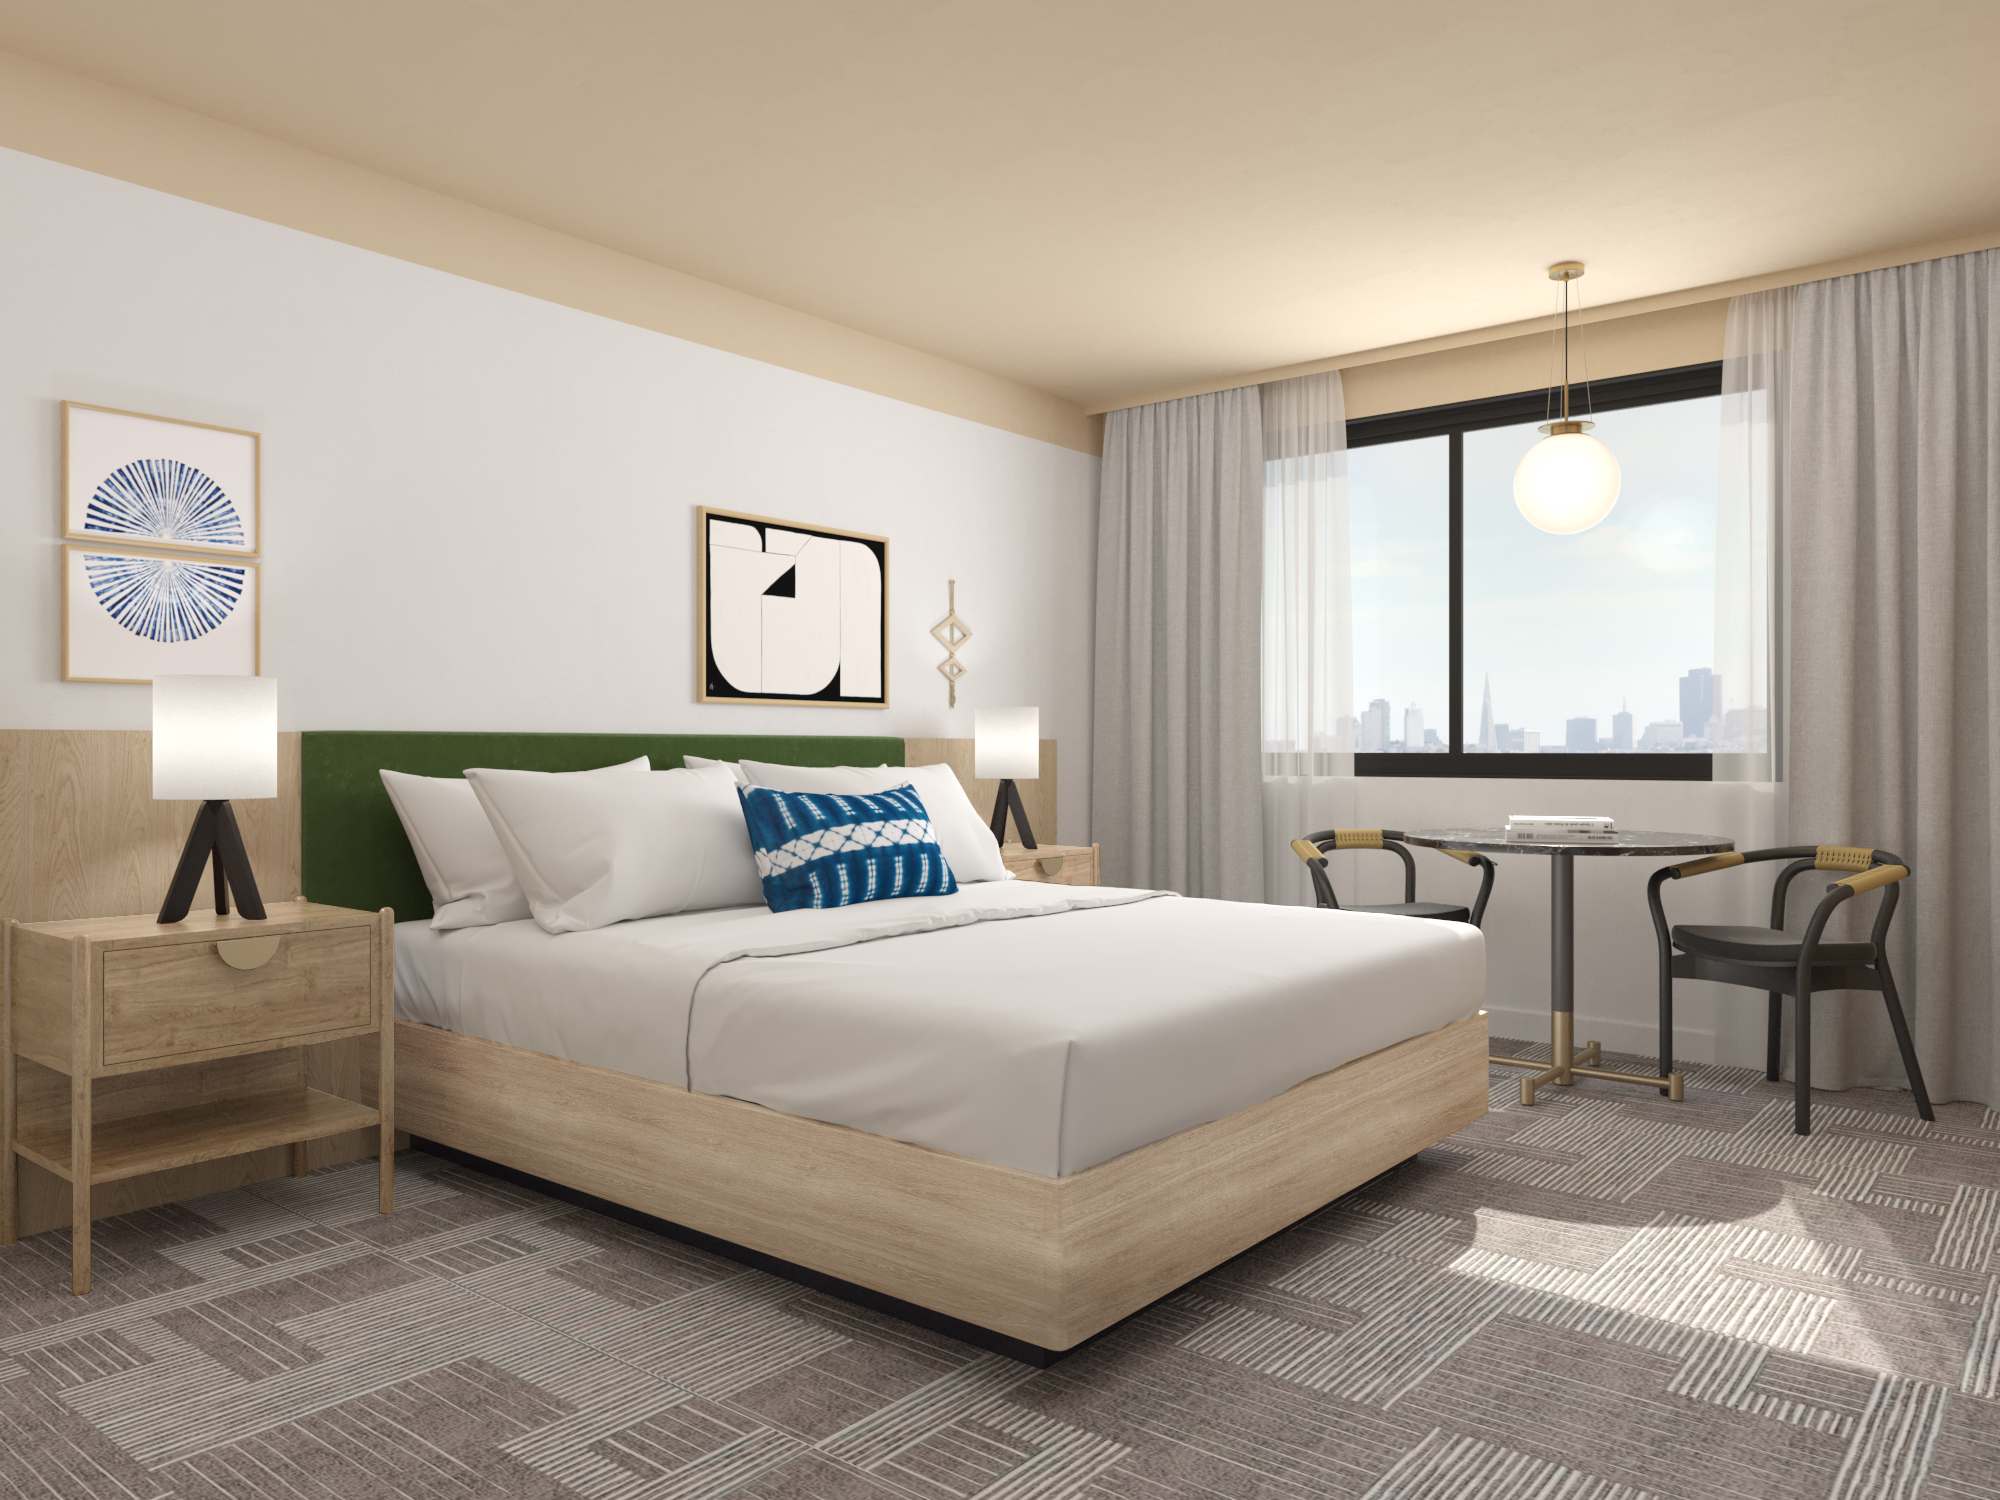 The guestroom design at the Enso is inspired by a modern Japanese home